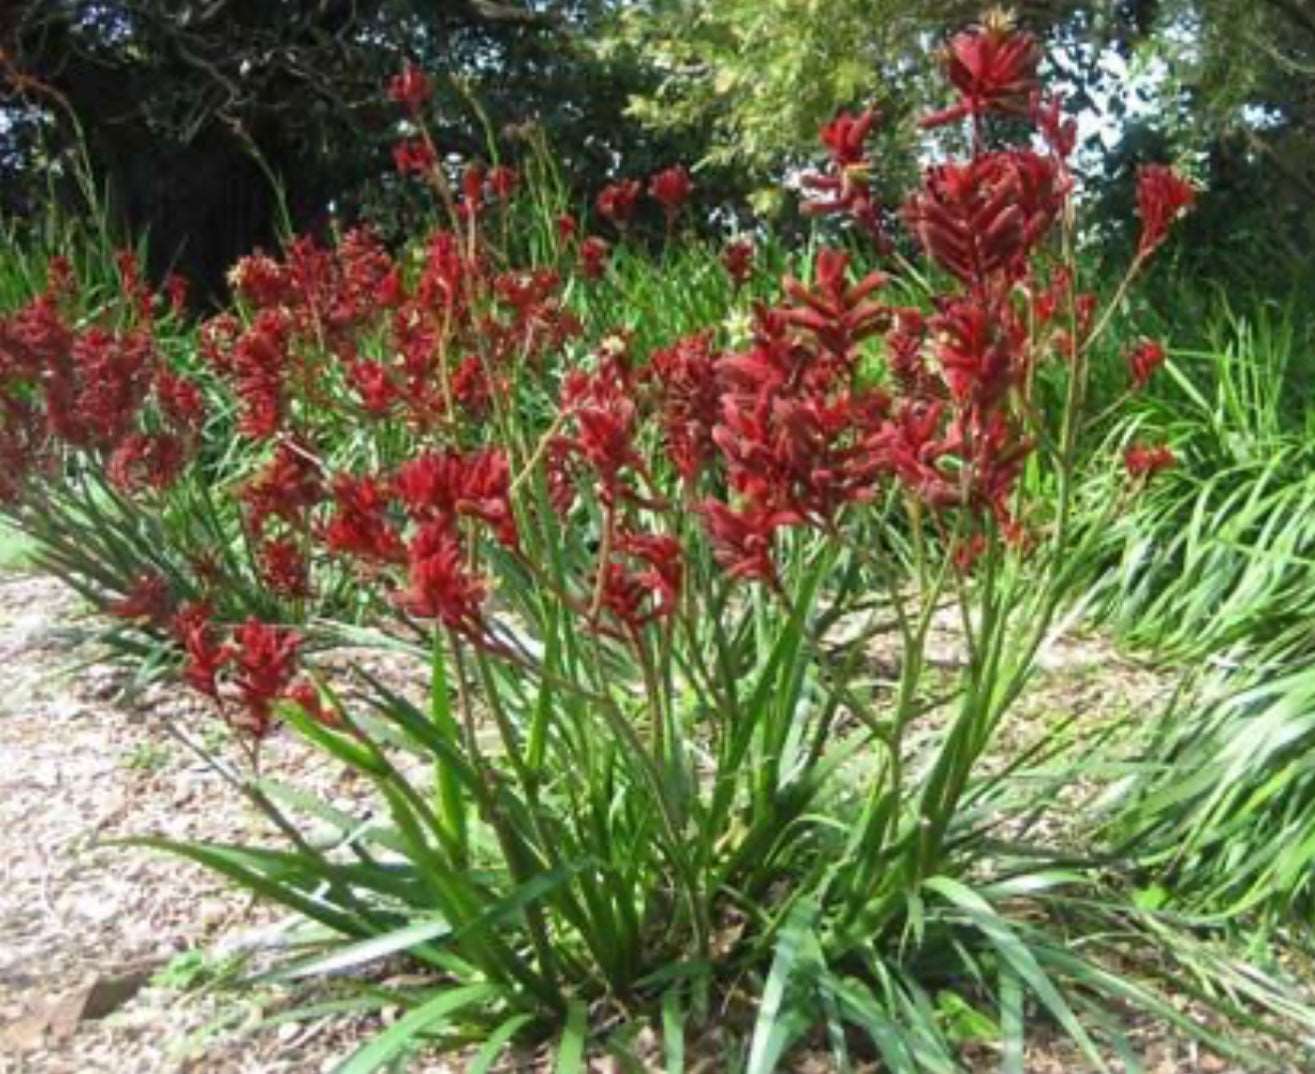 Anigozanthos 'Big Red' Red Kangaroo Paw Plant- One Gallon Size Healthy Harvesters